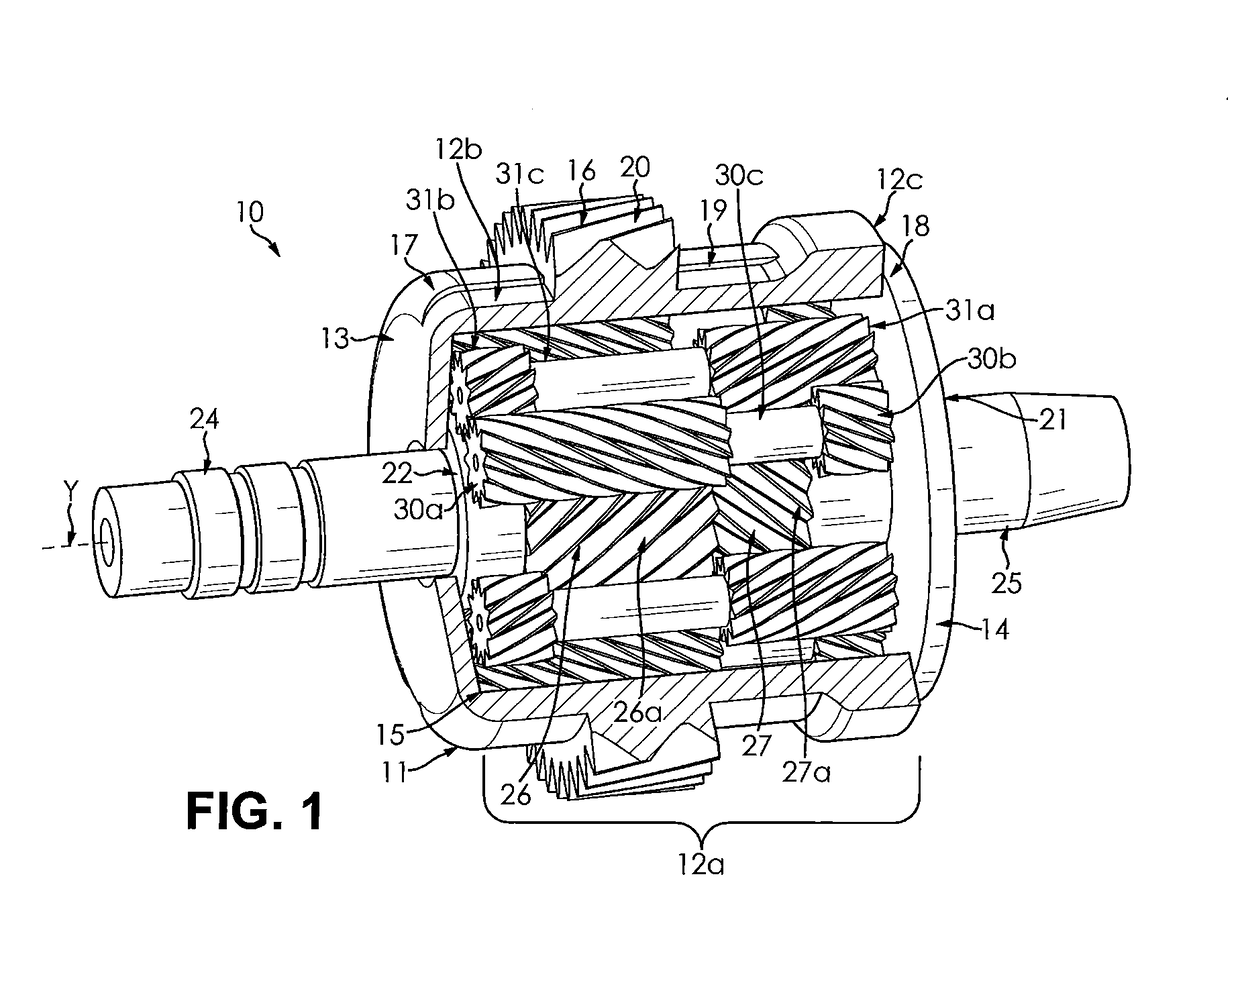 Limited slip inter-axle differential